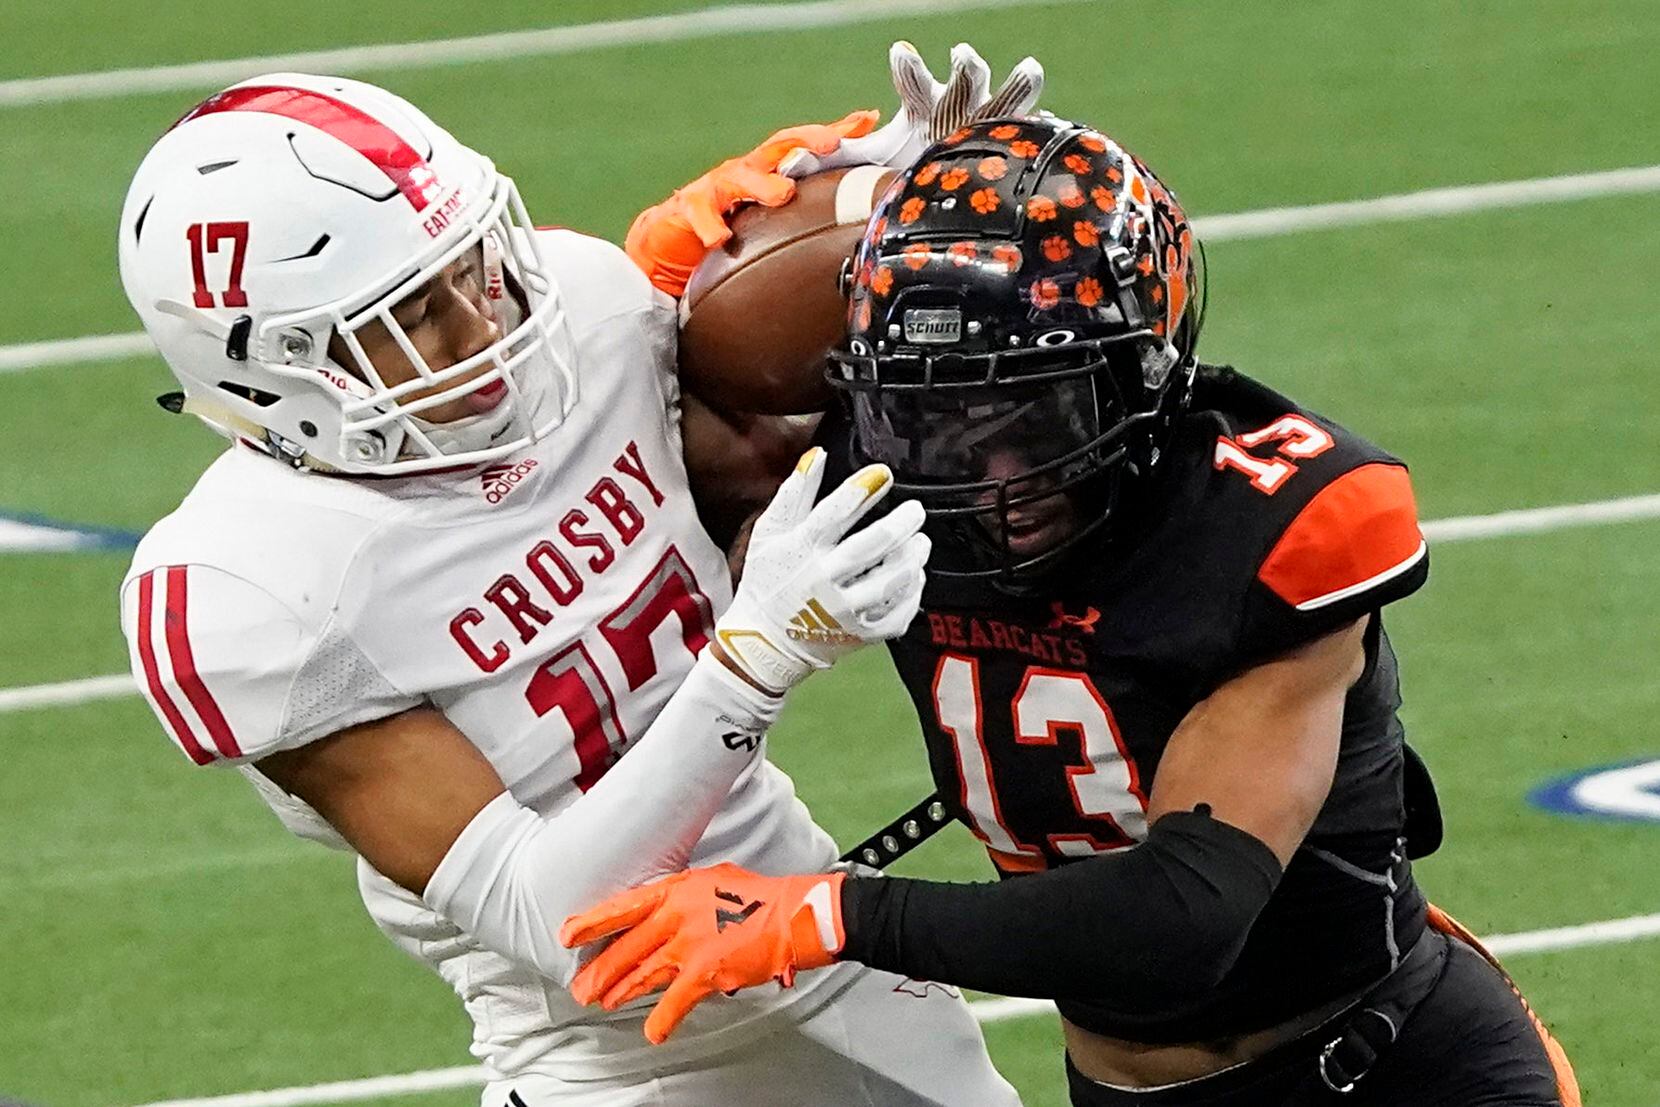 Aledo Logan Flinta (13) defends a pass to Crosby wide receiver Irvin Paige (17)\ during the first half of the Class 5A Division II state football championship game at AT&T Stadium on Friday, Jan. 15, 2021, in Arlington. (Smiley N. Pool/The Dallas Morning News)